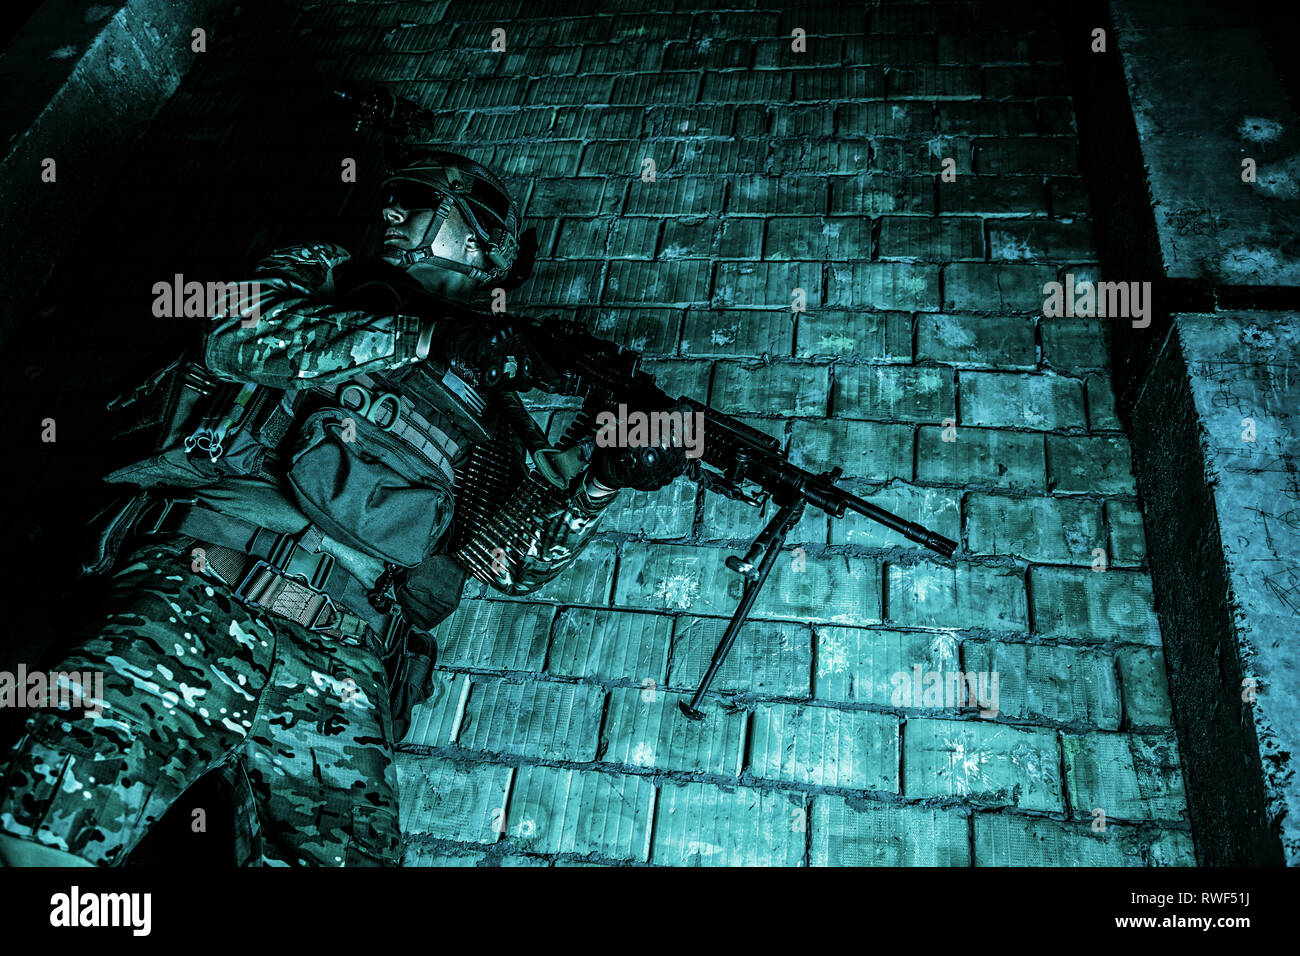 U.S. Army Ranger with machine gun and night vision goggles moving along the wall during a mission. Stock Photo